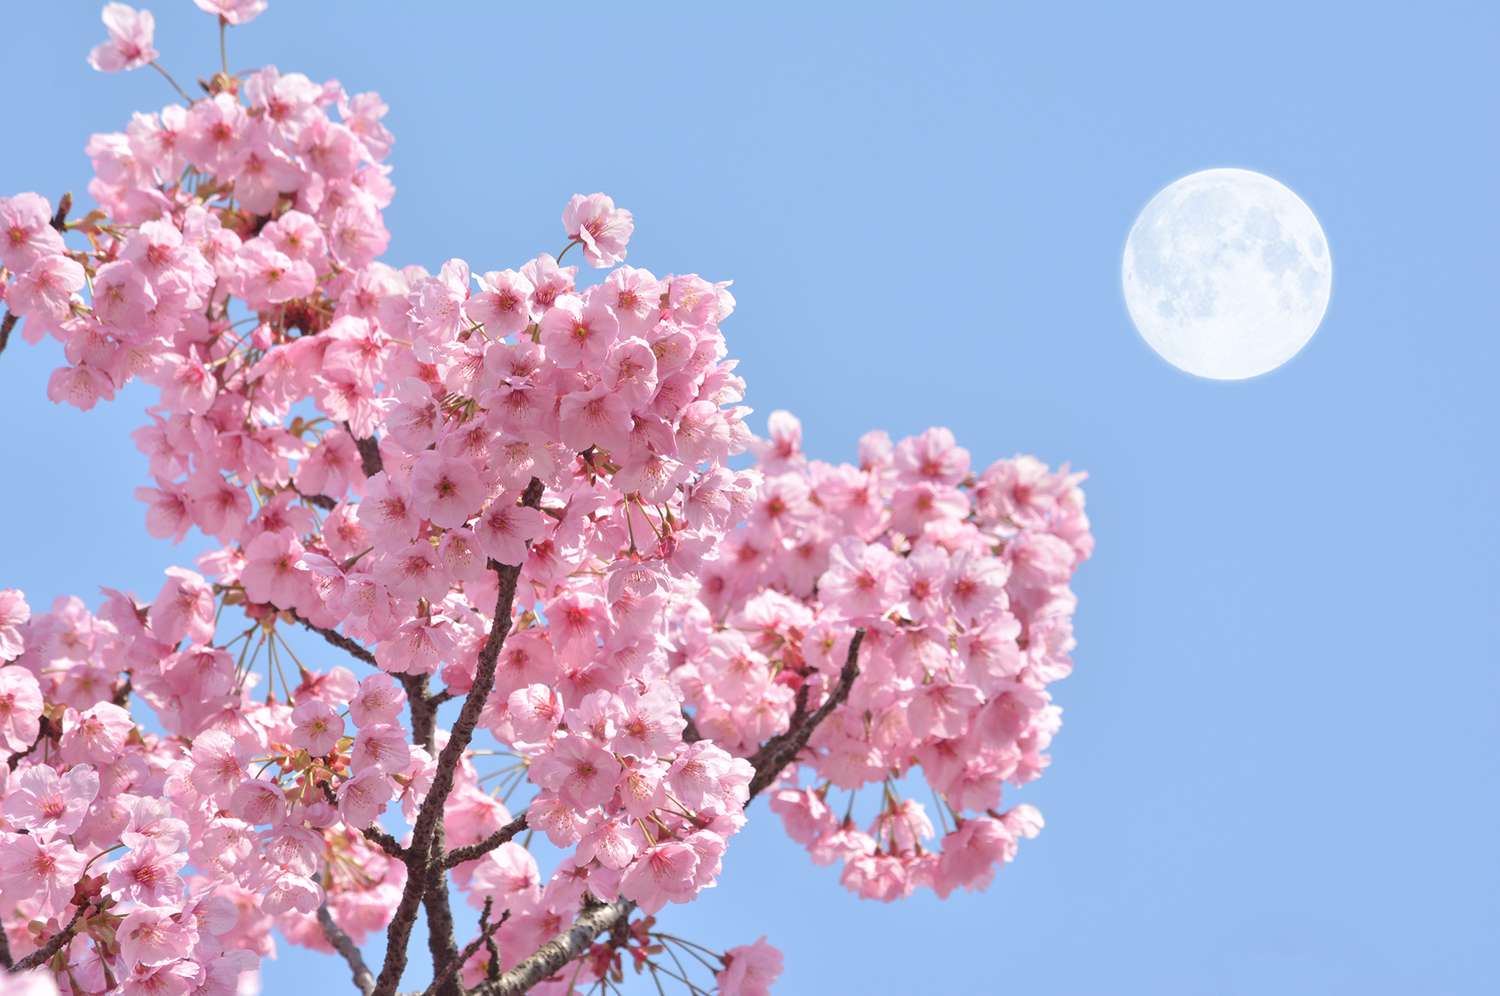 Cherry blossom tree branches in front of a blue sky and full moon